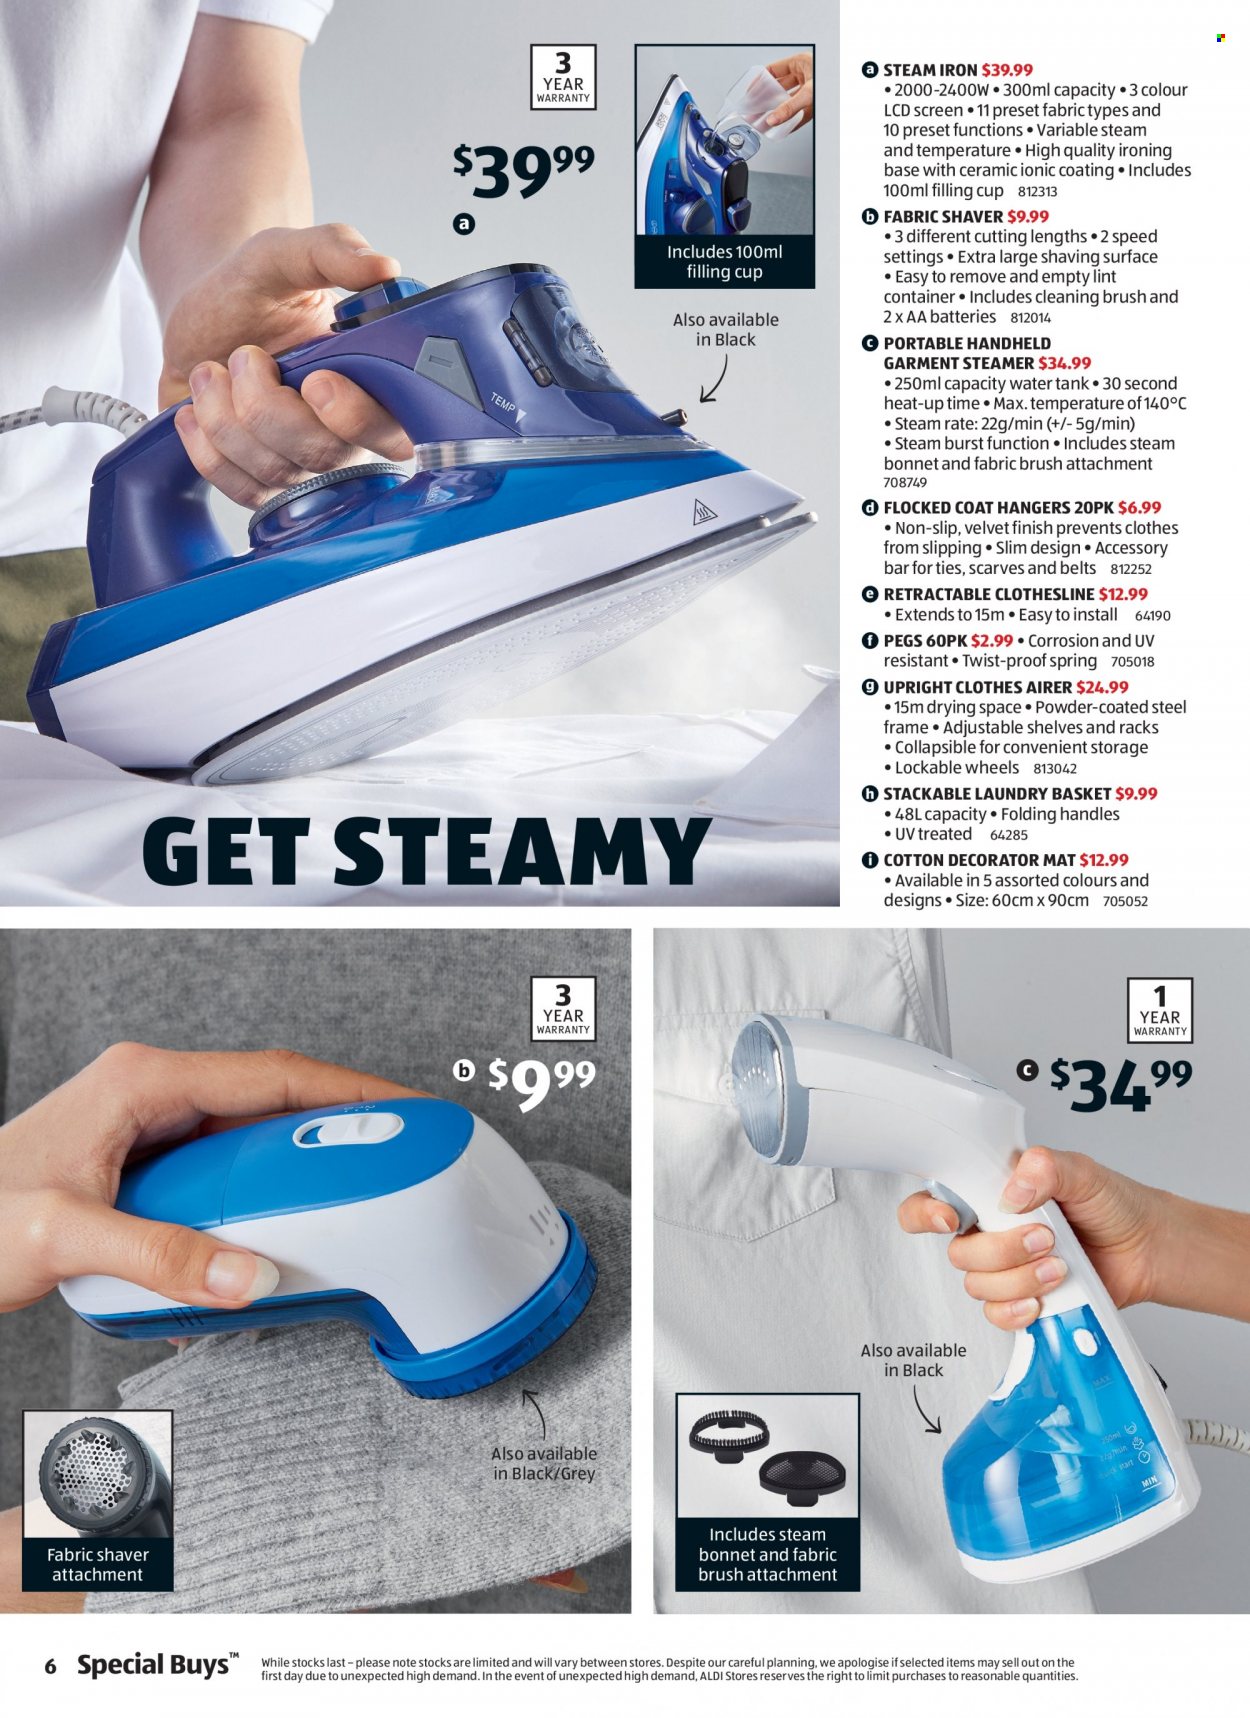 ALDI Catalogue - 12 May 2022 - 18 May 2022 - Sales products - basket, hanger, airer, cup, container, aa batteries, tank, hạndheld, steam iron, iron, garment steamer, fabric shaver, coat hanger, scarf, water tank. Page 6.